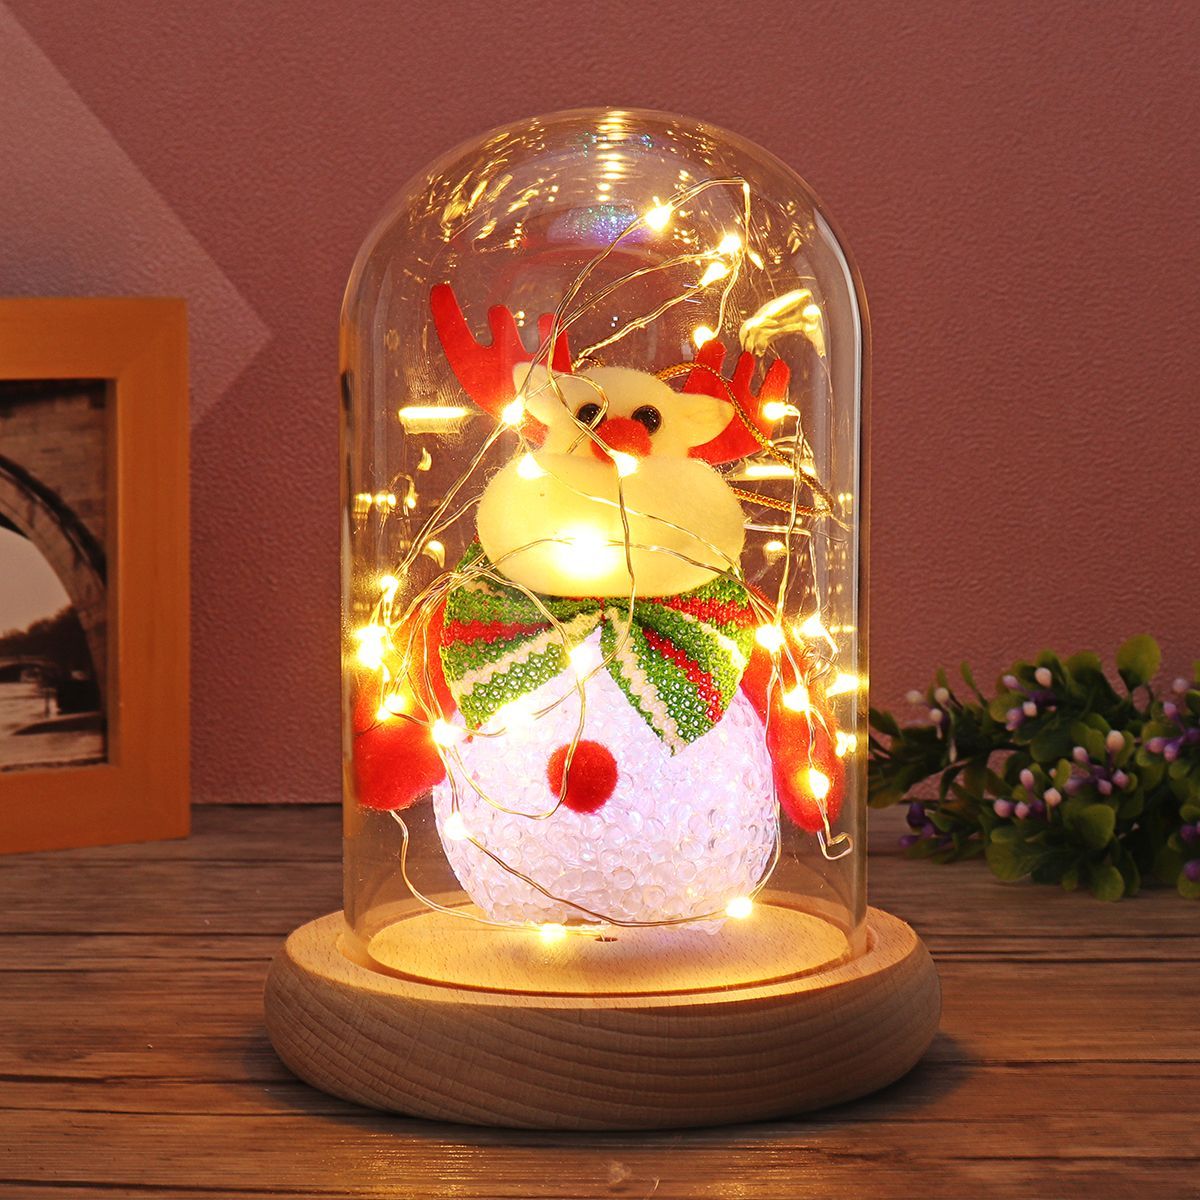 9x15cm-Glass-Dome-Bell-Jar-Cloche-Display-Wooden-Base-With-Fairy-LED-Light-Decorations-Christmas-Gif-1394851